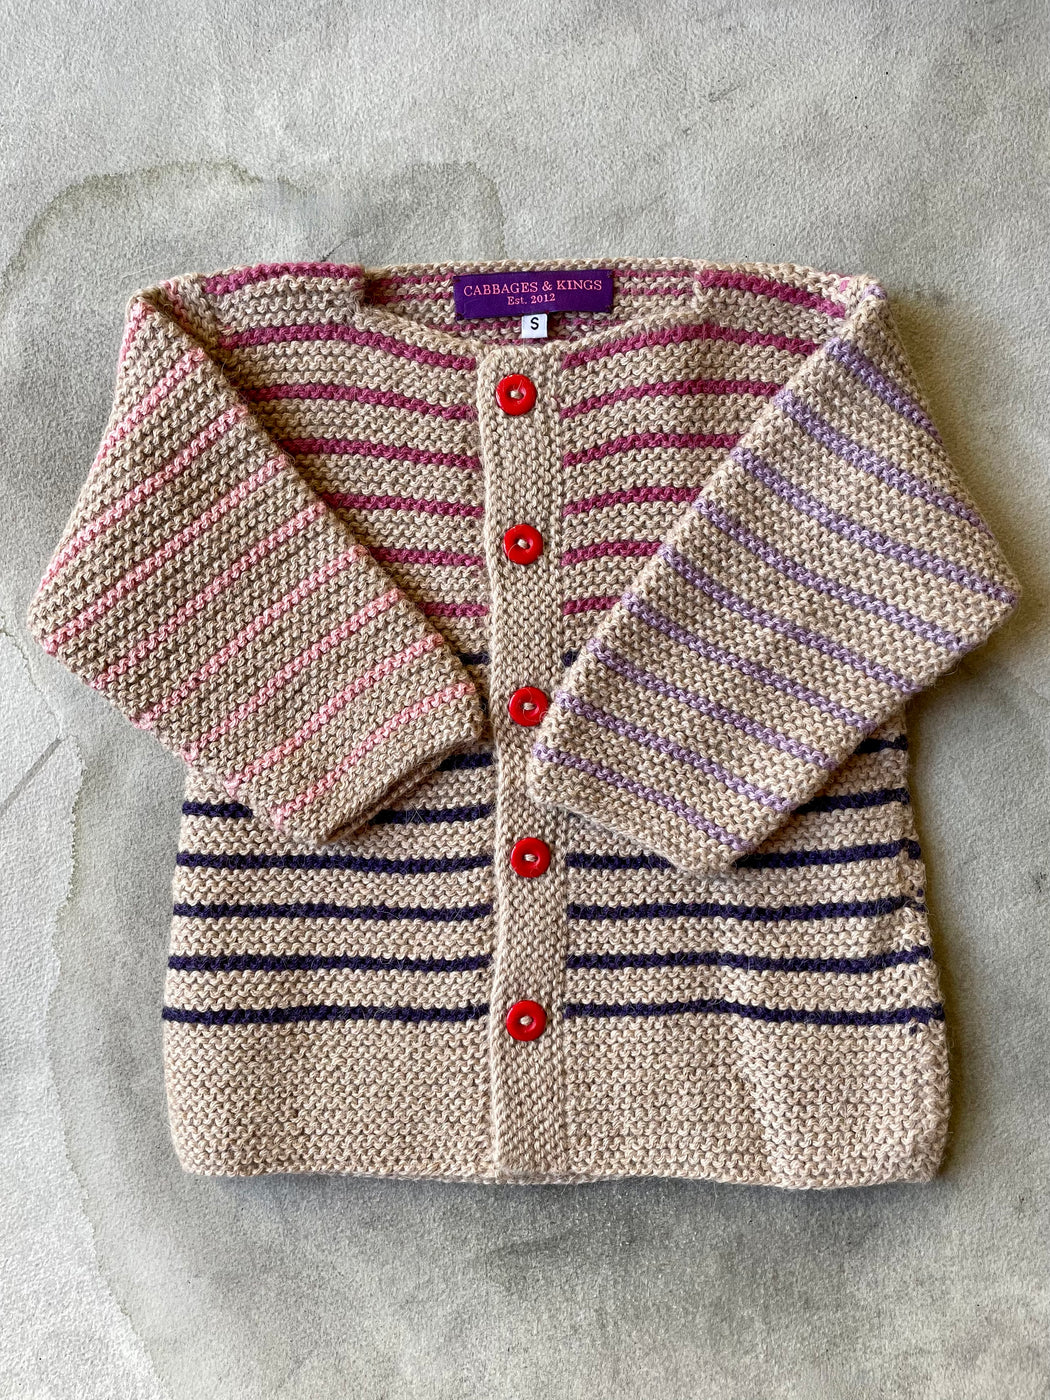 Cabbages & Kings "Rose Dreams" Sweater (1 - 2 years)